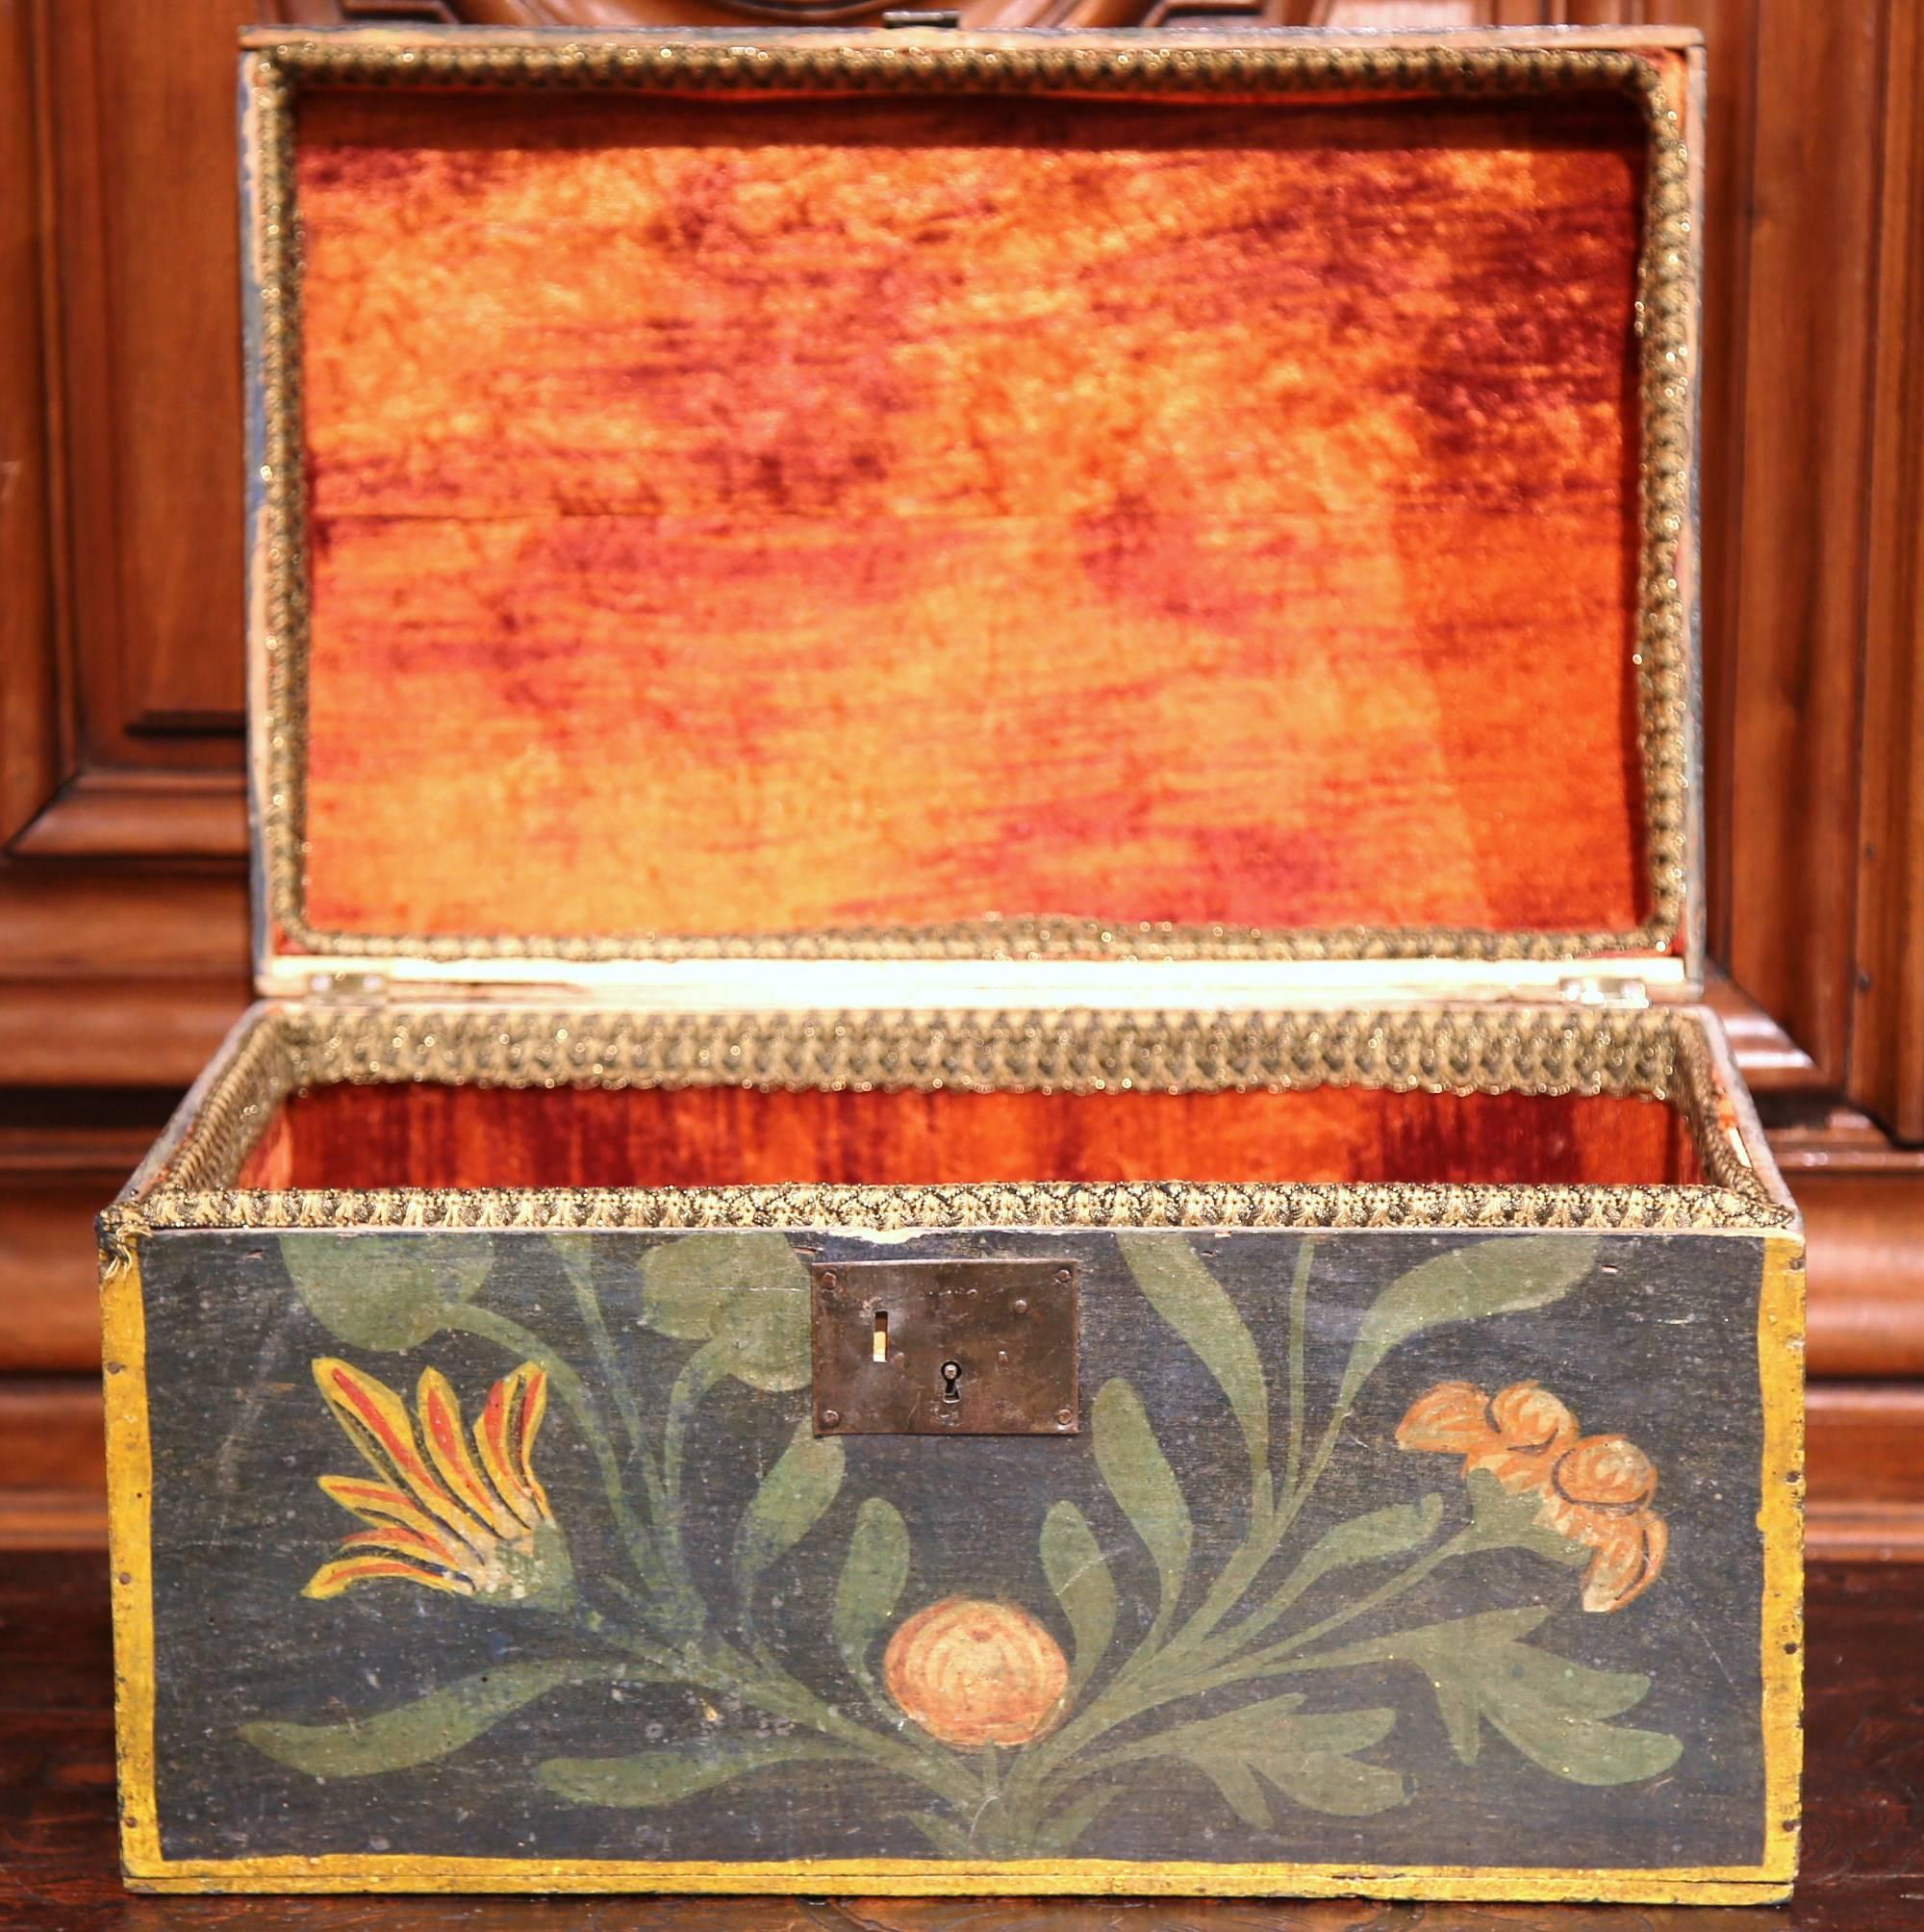 18th Century French Hand-Painted Wedding Box with Flowers and Bird from Normandy 1